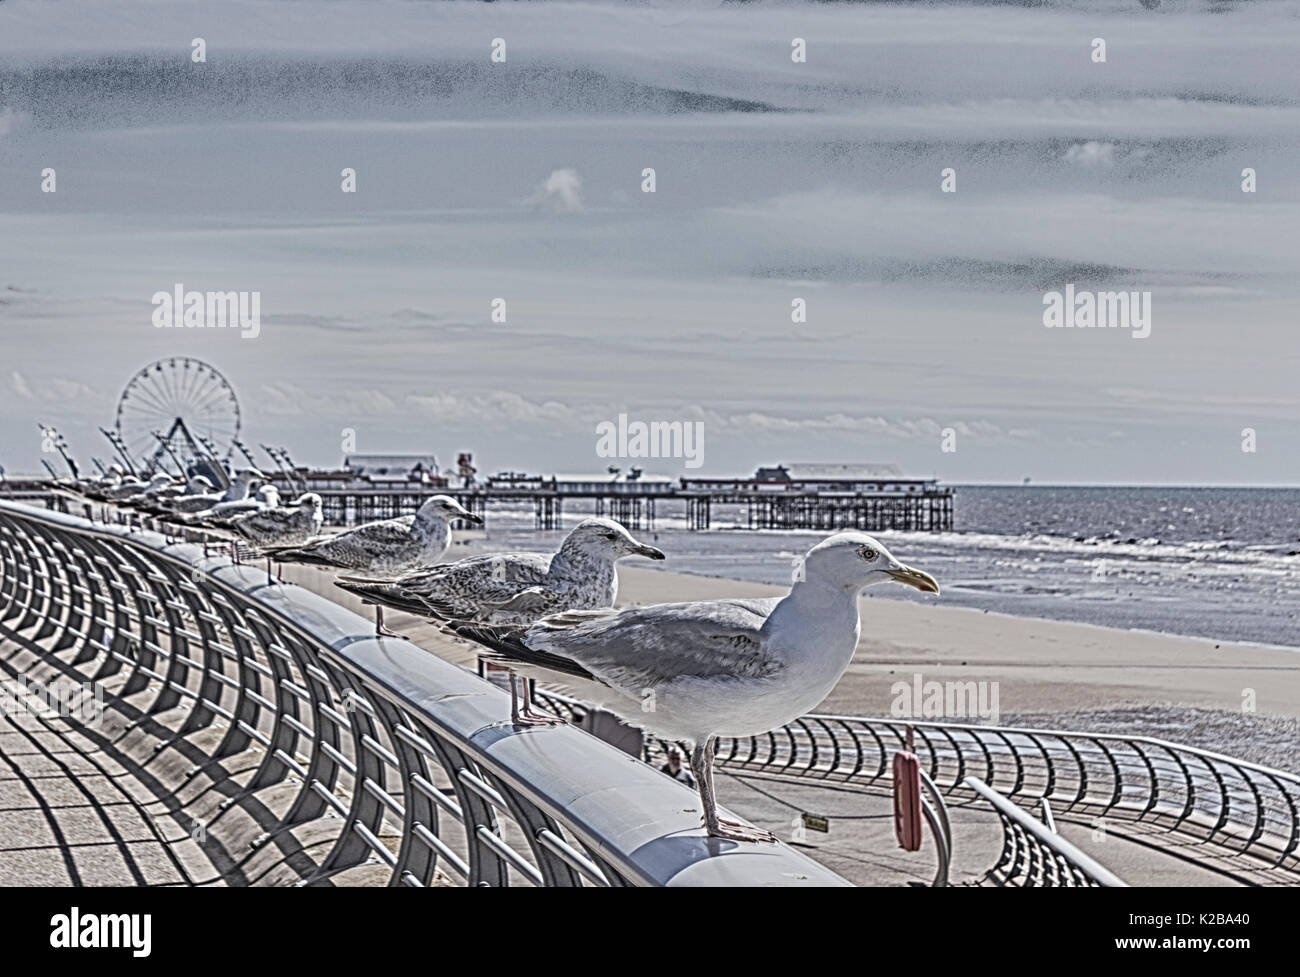 Blackpool, Fylde Coast, Lancashire, England. Row of seagulls perched on a railing looking out to sea. Stock Photo